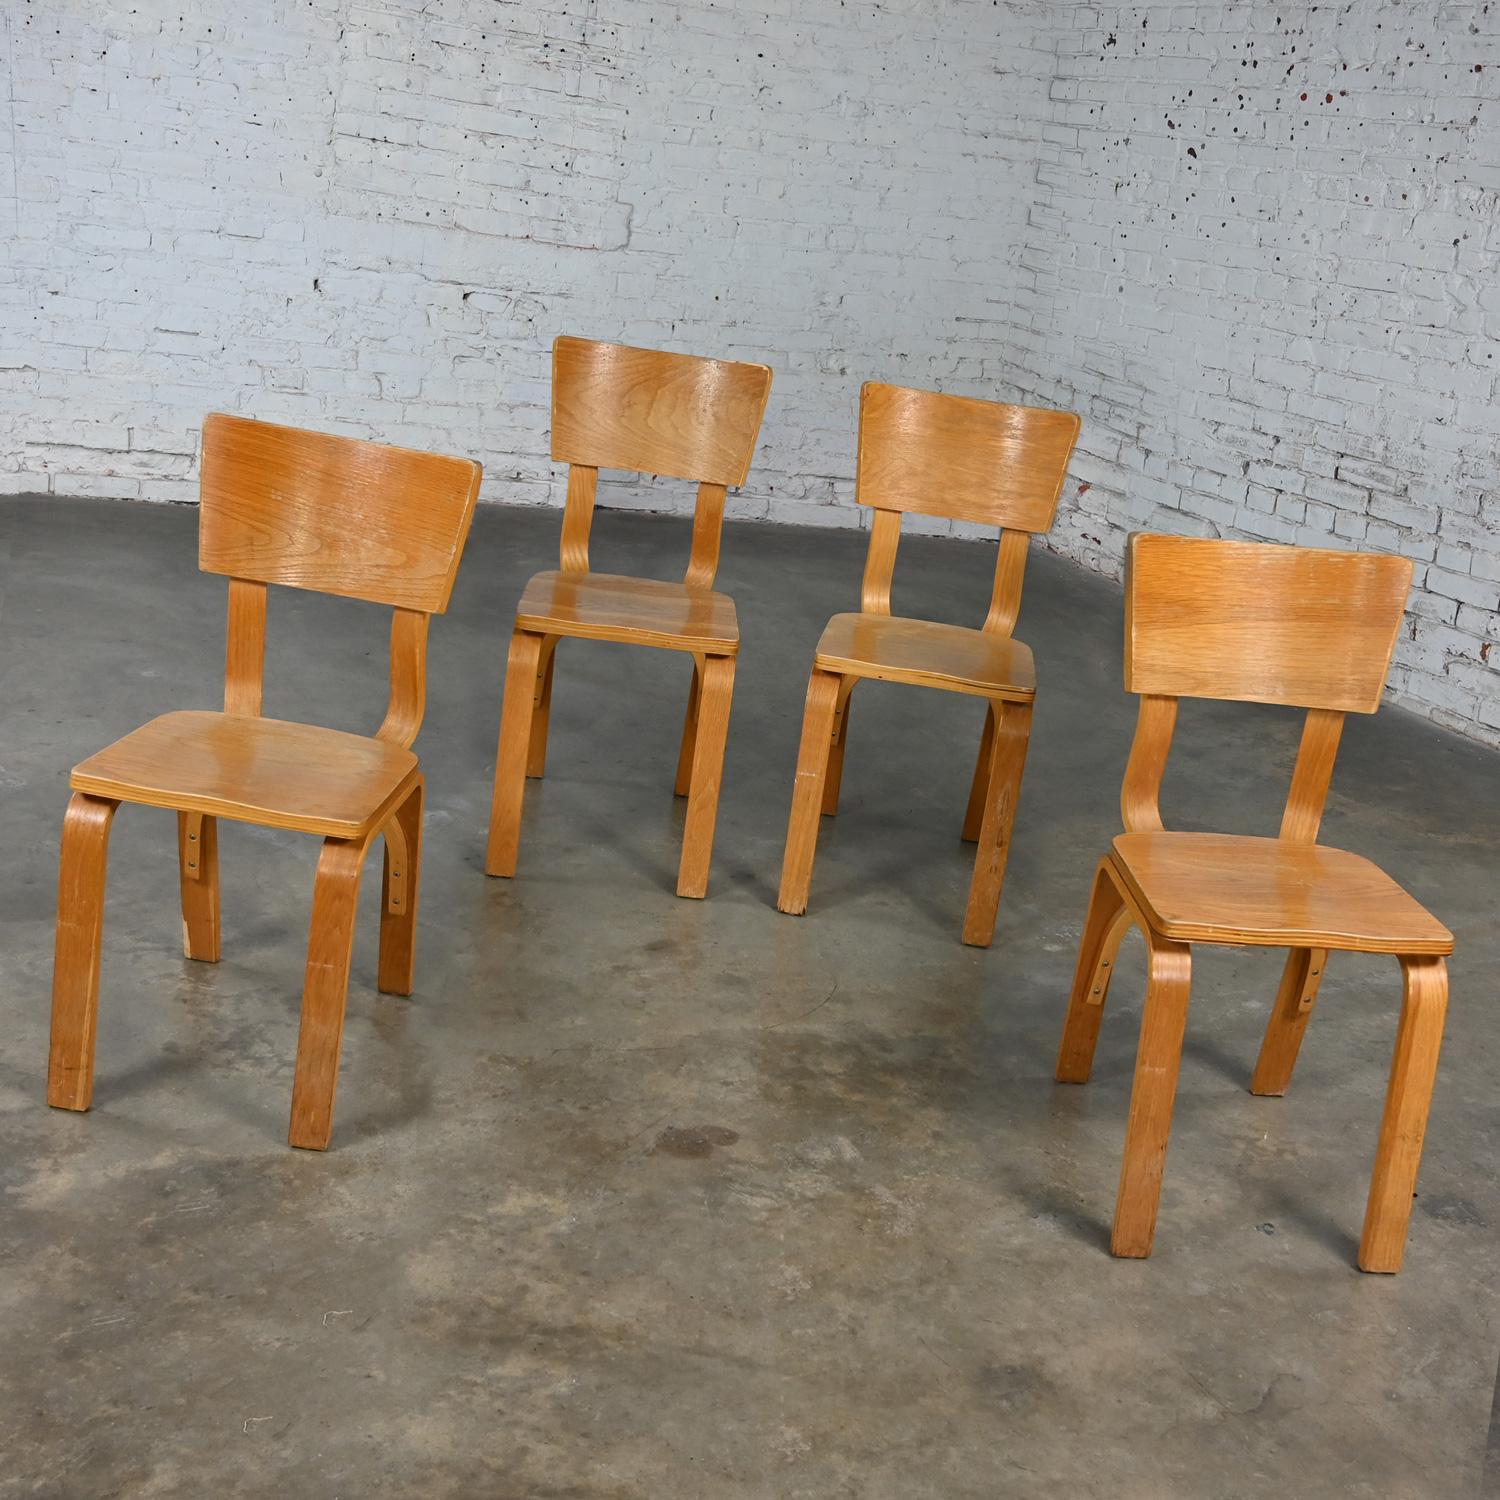 Marvelous vintage Mid-Century Modern Thonet #1216-S17-B1 dining chairs comprised of bent oak plywood with saddle seats and a single bow back stretcher, set of 4, as is condition. See note below regarding refinishing options. Beautiful condition,